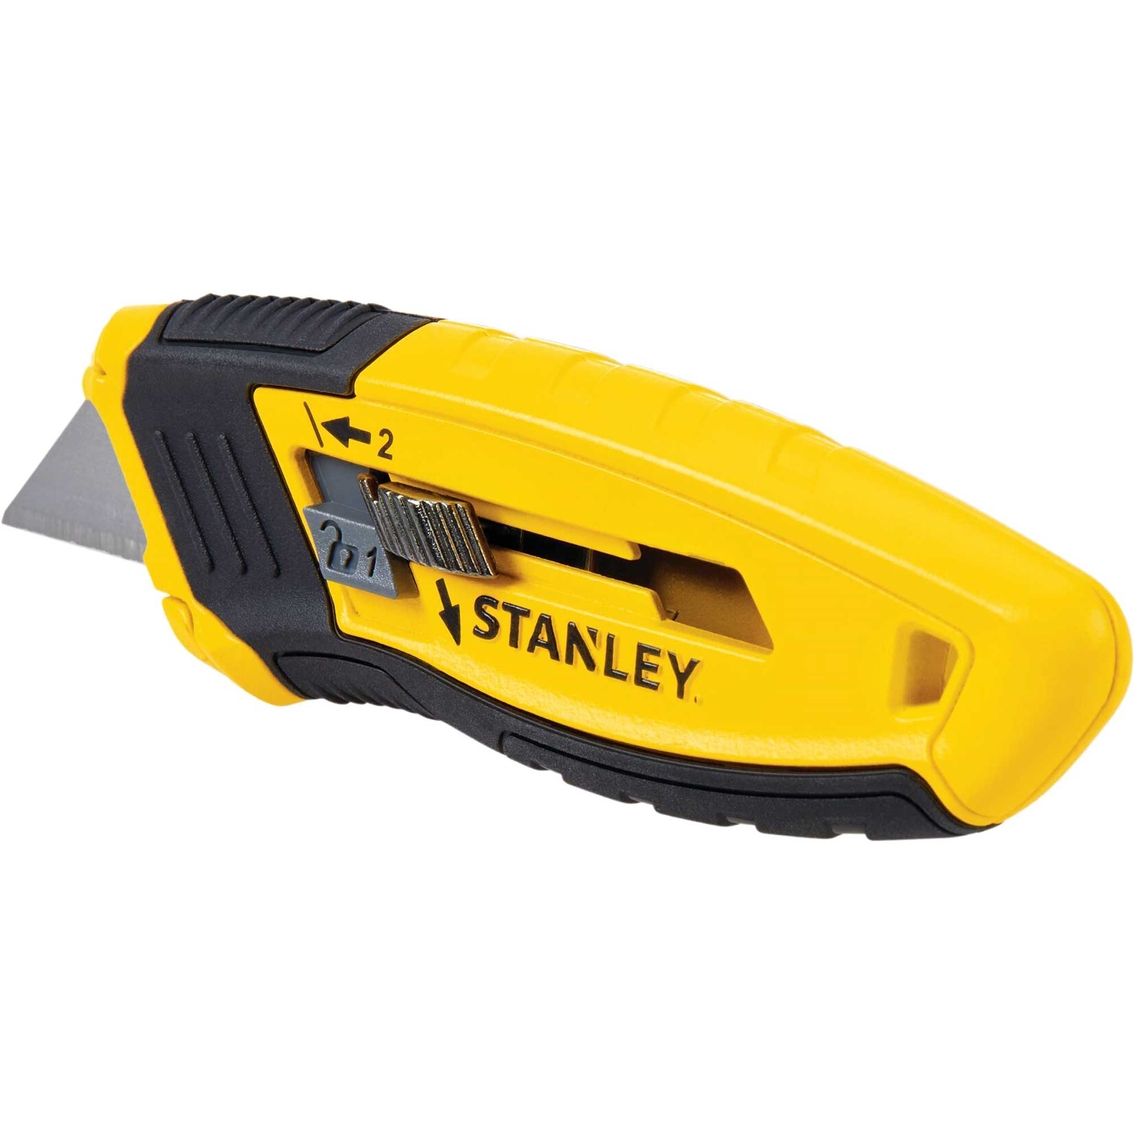 Stanley Control Grip Retractable Utility Knife - Image 3 of 5